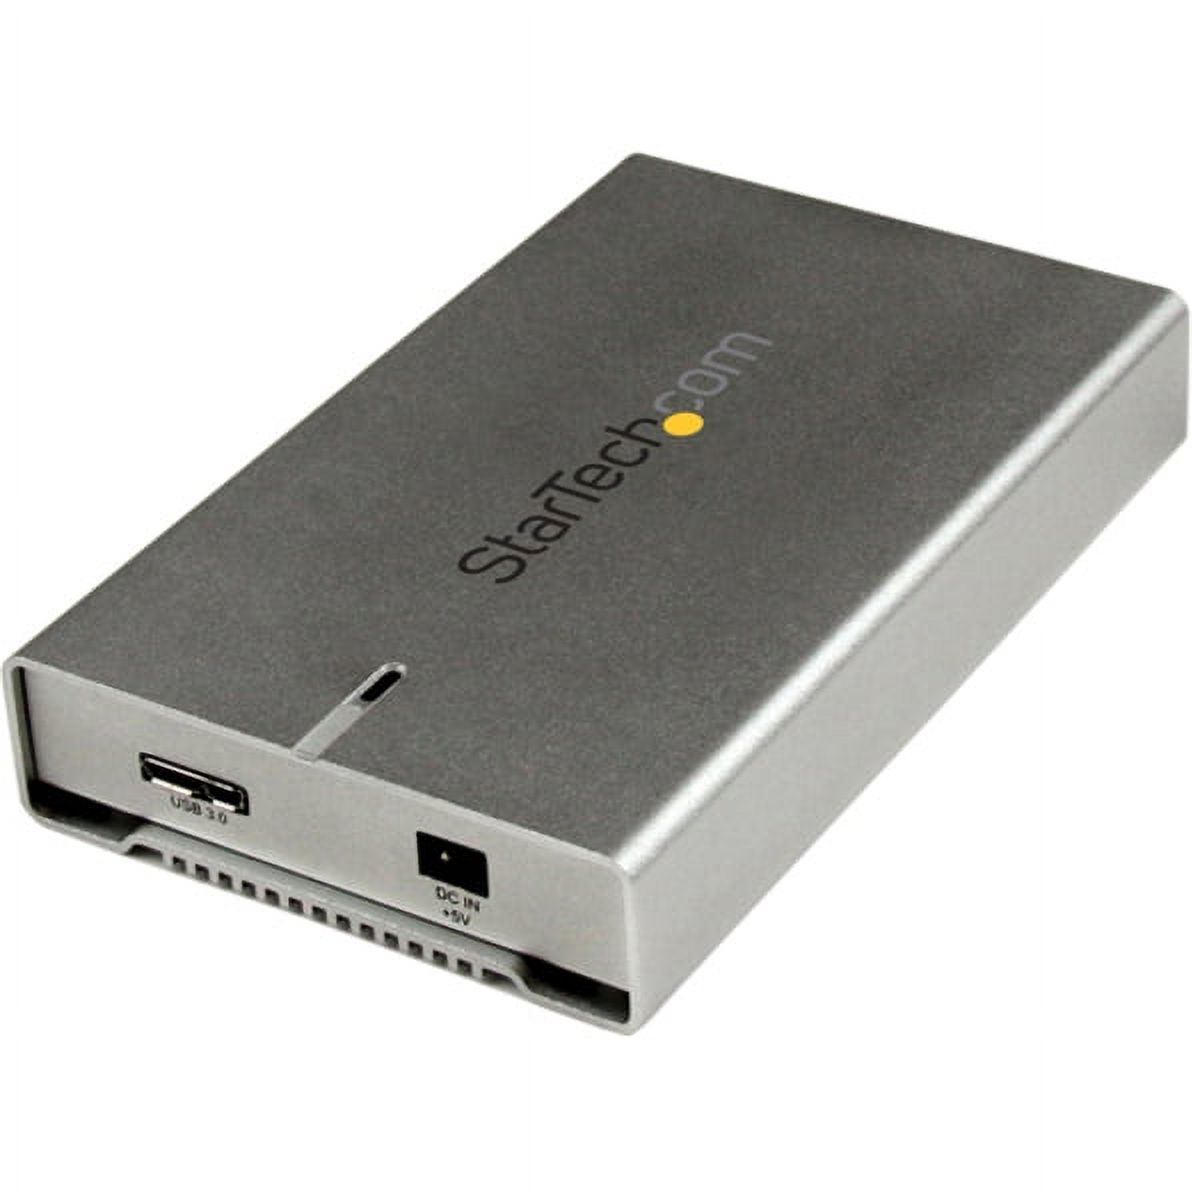 StarTech.com 2.5������� Aluminum USB 3.0 SATA III Hard Drive Enclosure w/ UASP, SSD/HDD Height up to 12.5mm - image 2 of 3